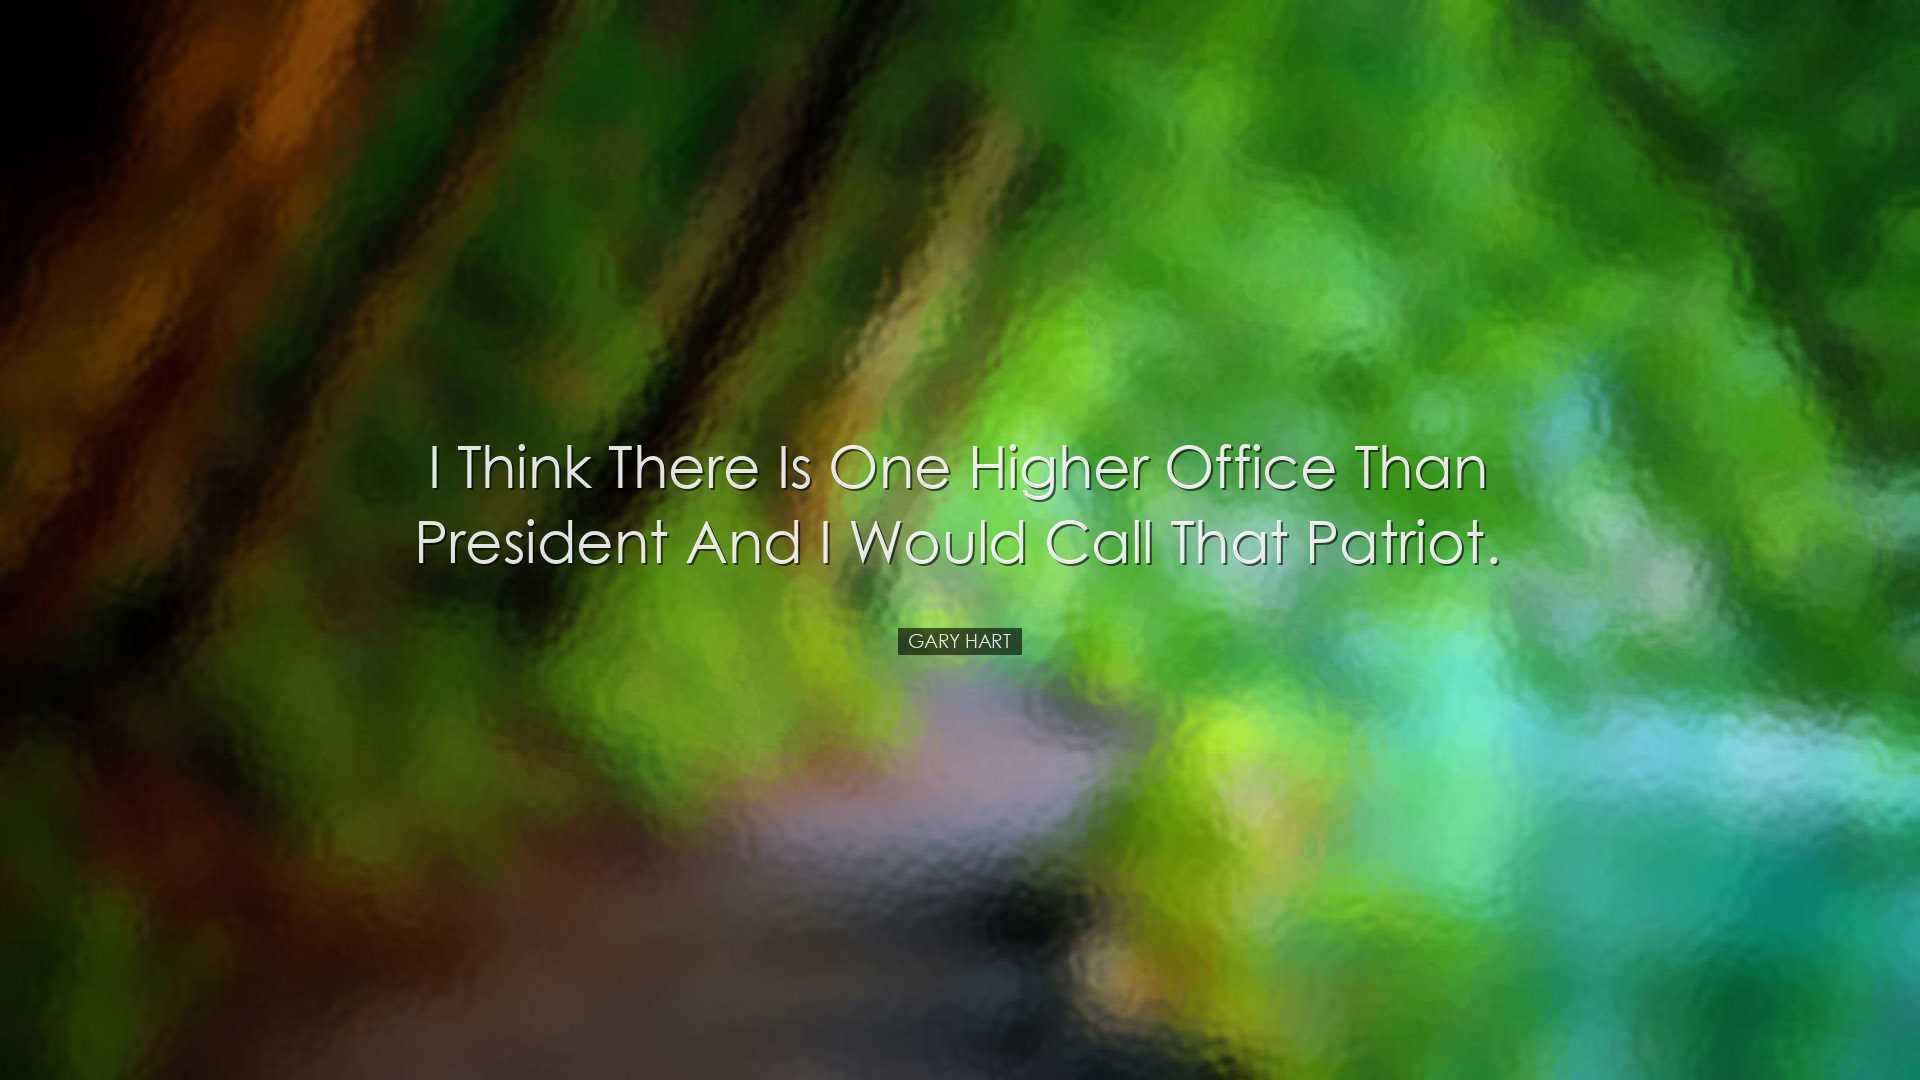 I think there is one higher office than president and I would call